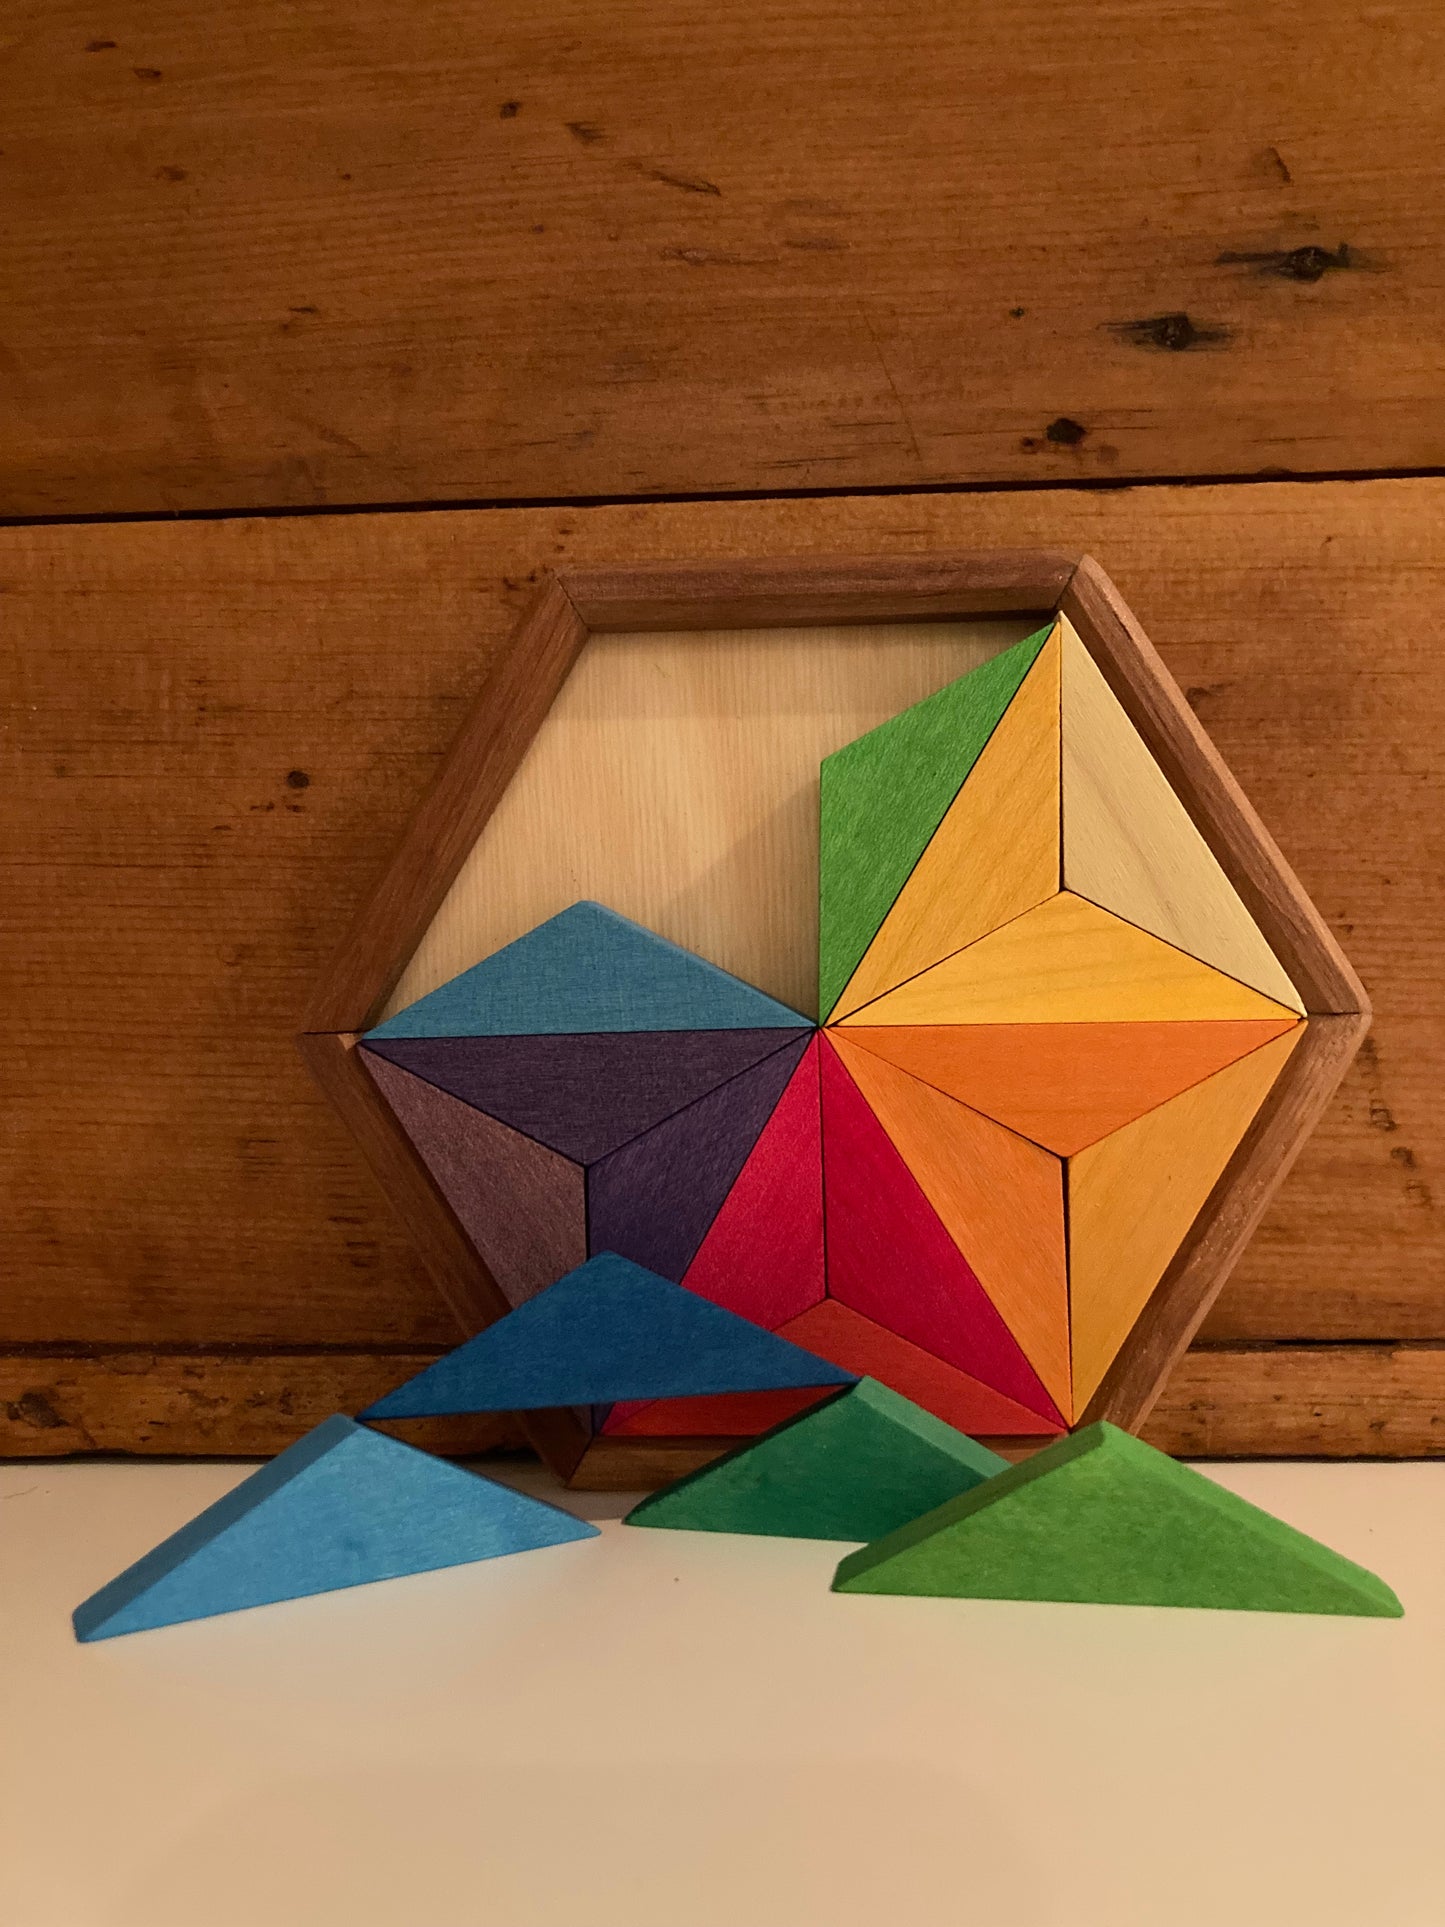 Wooden Toy - Grimm's RAINBOW STAR PUZZLE